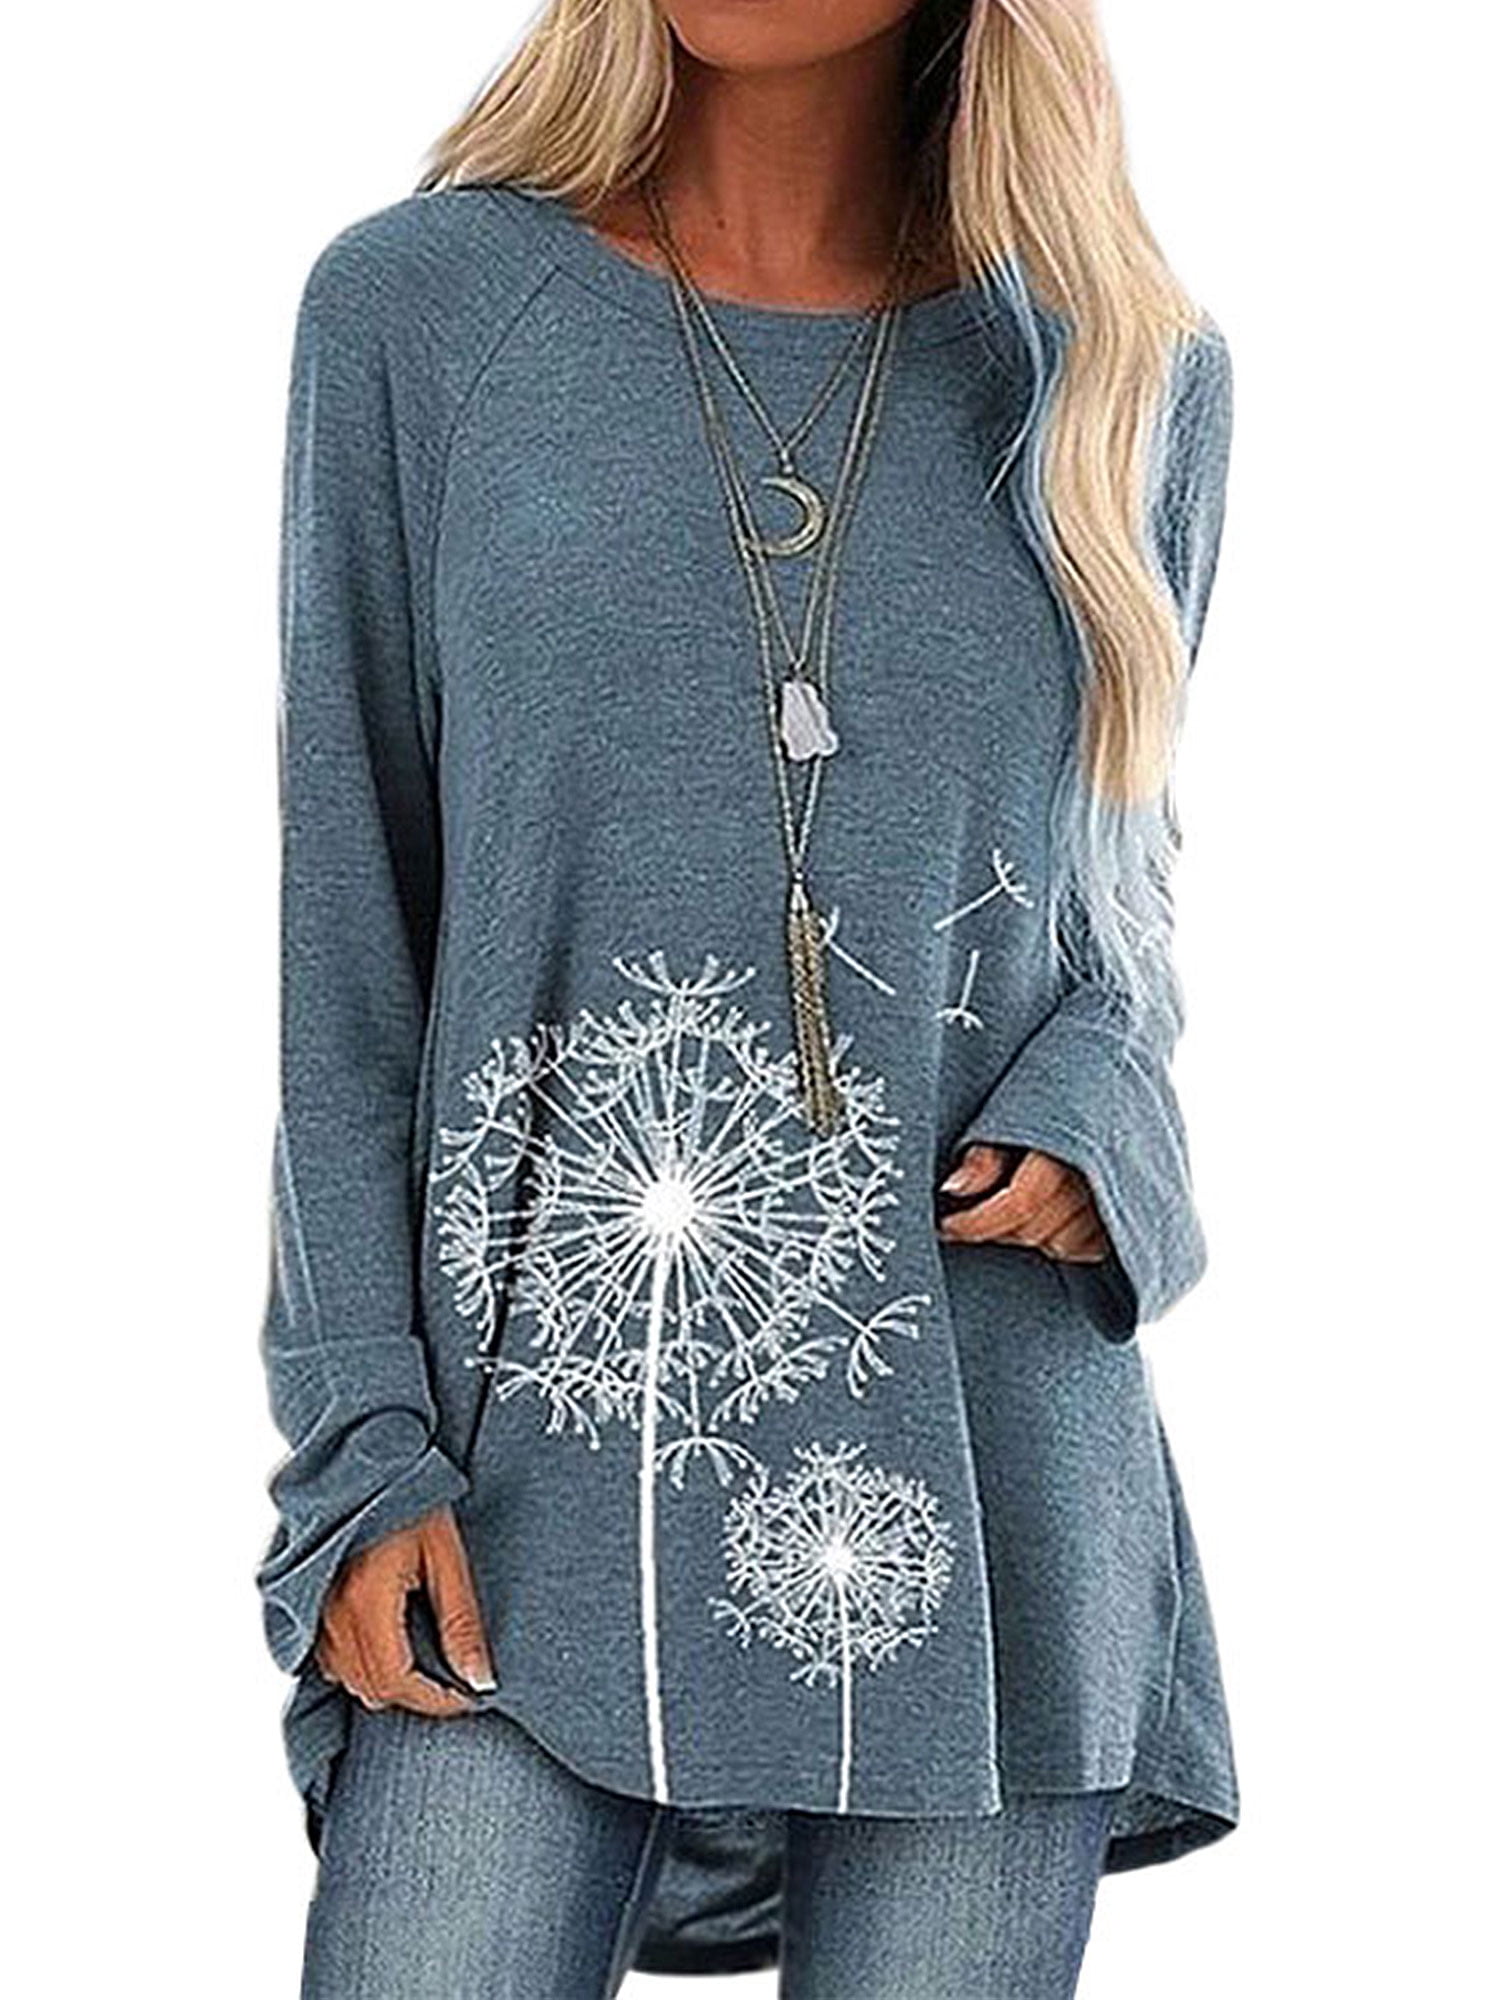 Fashion Women's Loose Long Sleeve Cotton Casual Blouse Shirt Tunic Tops Pullover 